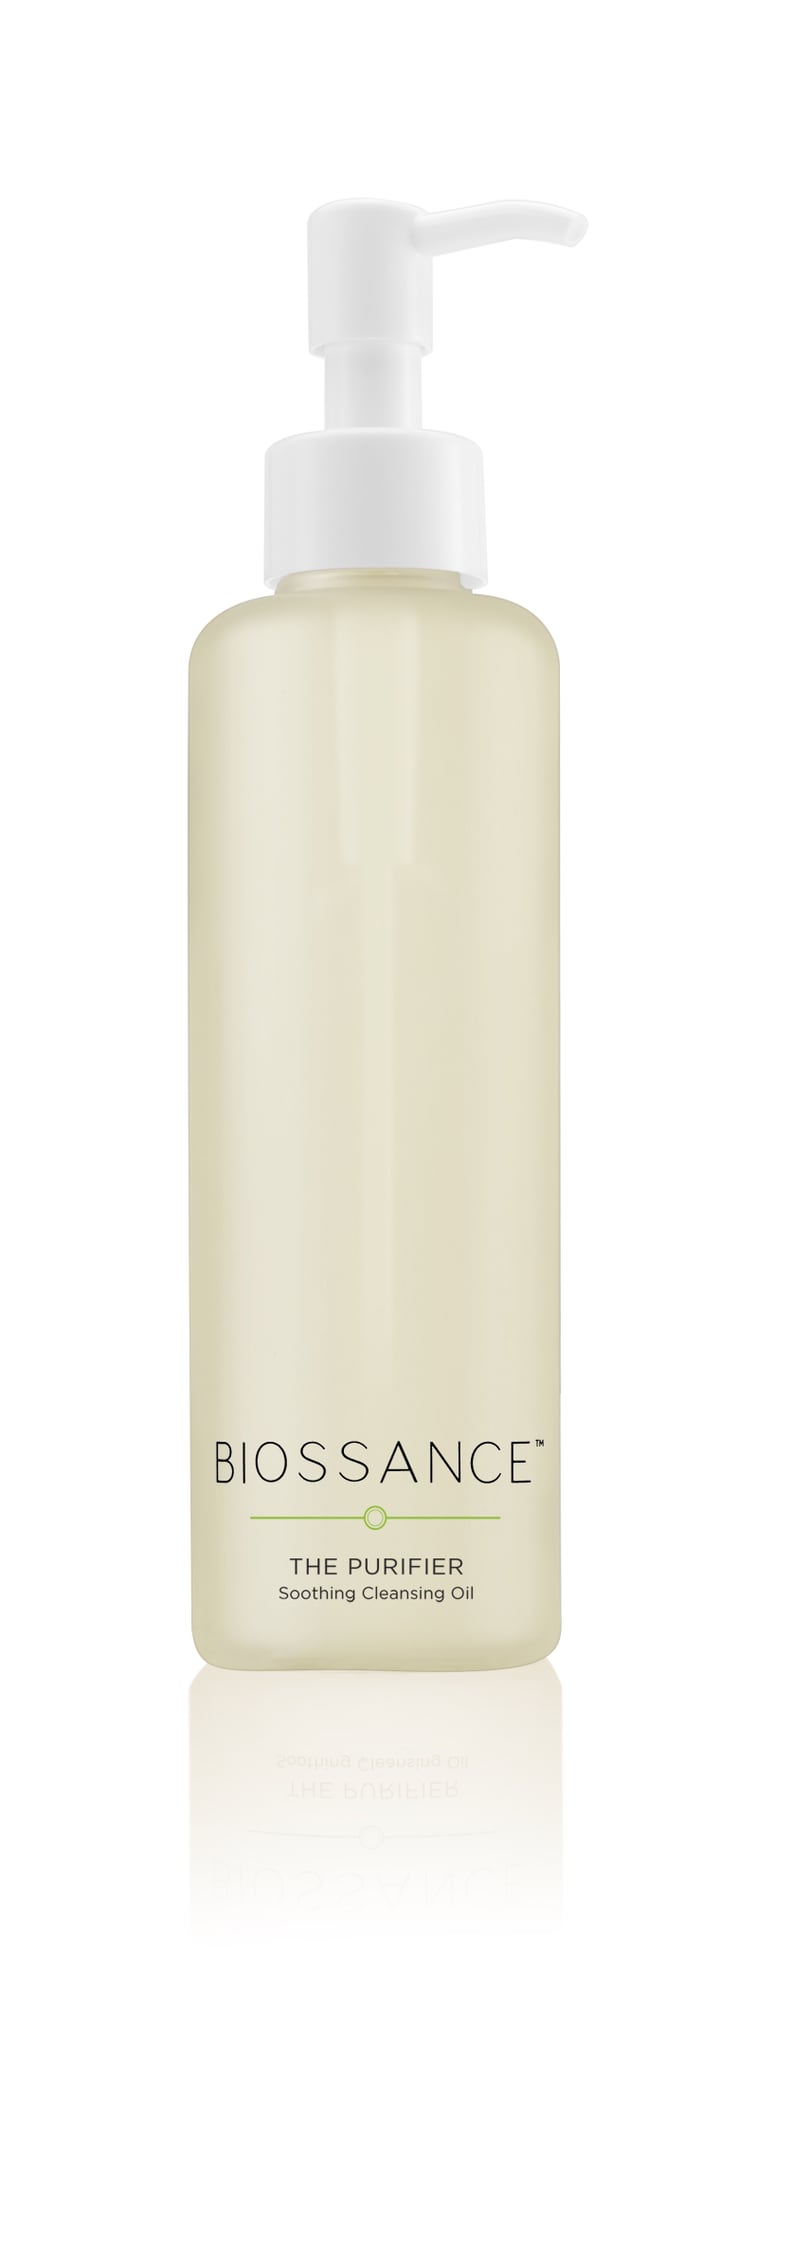 Biossance Purifier Soothing Cleansing Oil